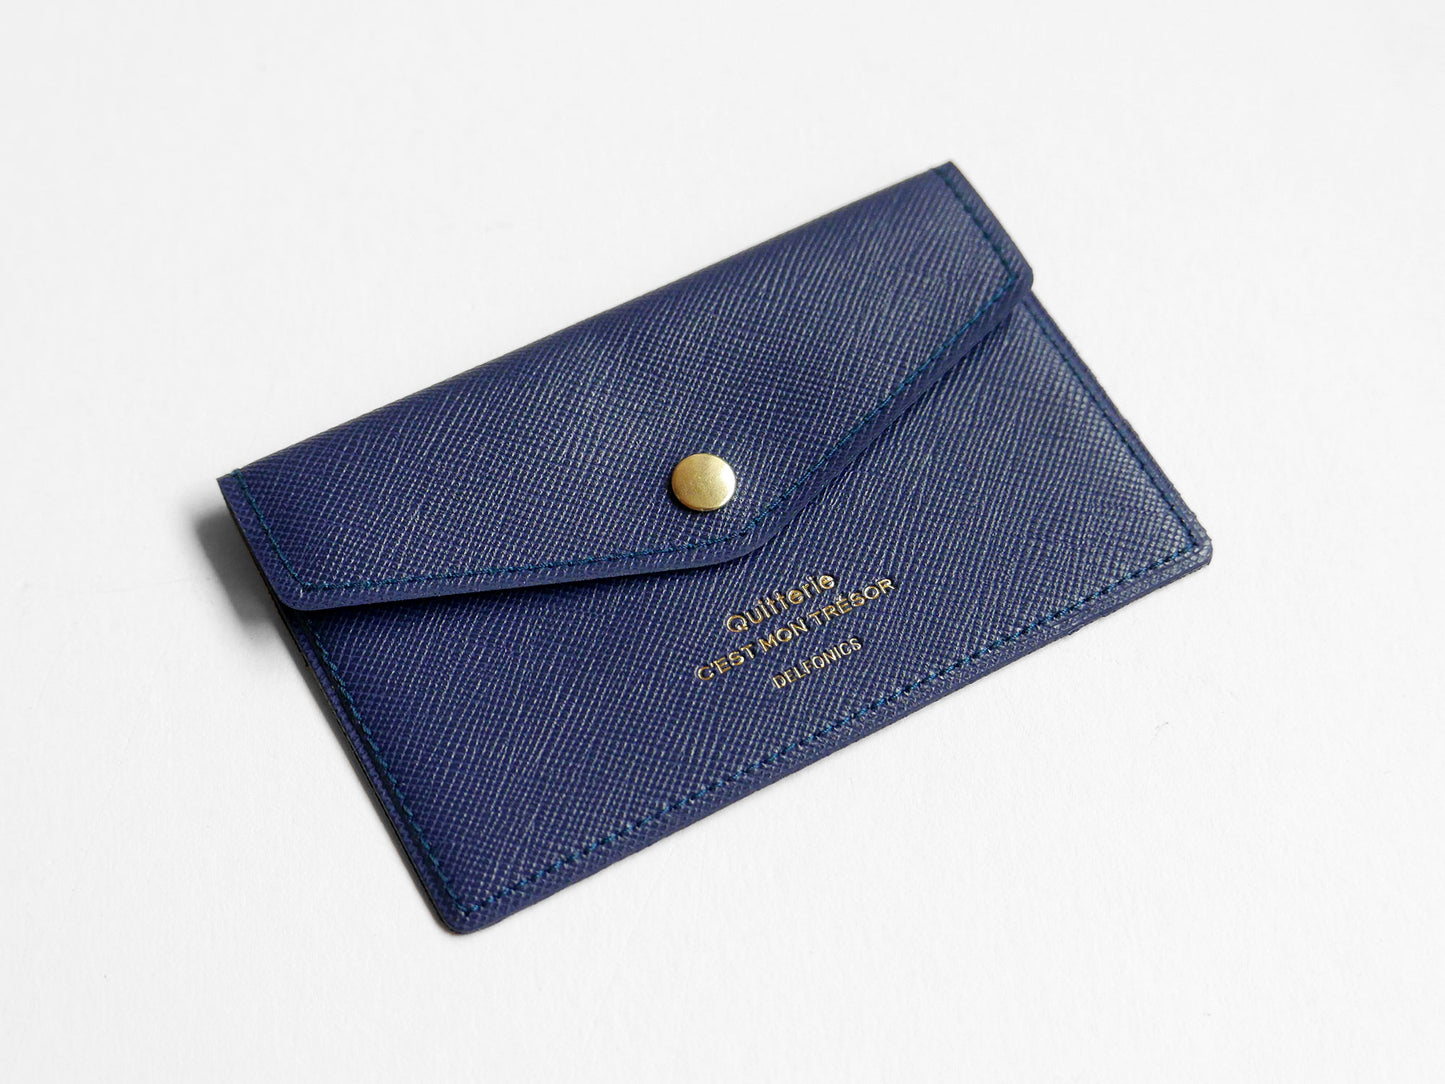 Quitterie Card Case